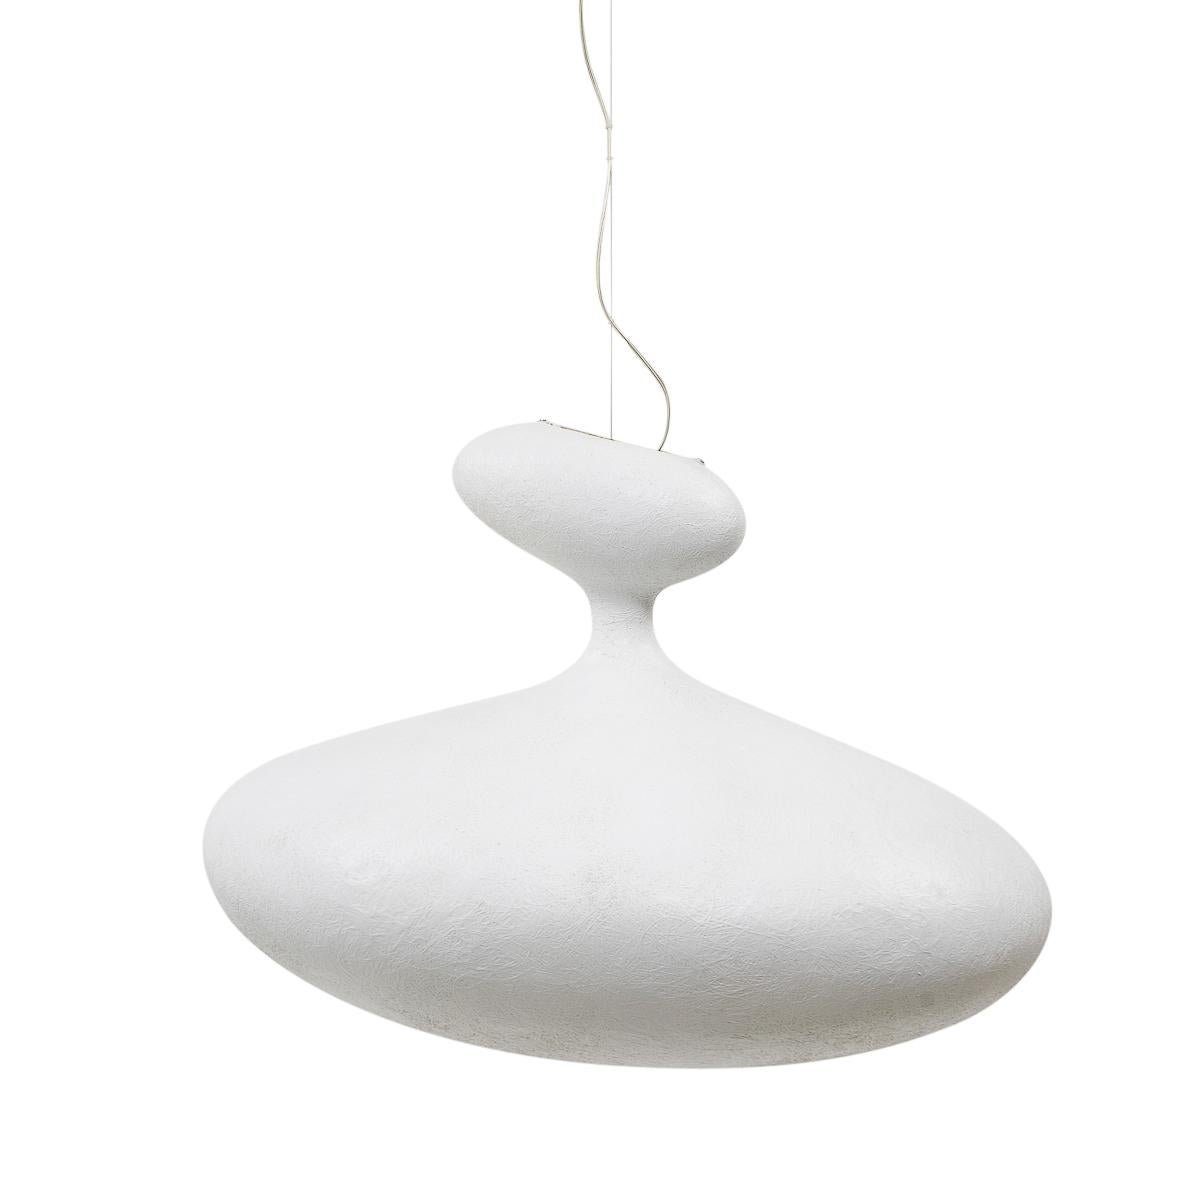 The E.T.A. Sat ceiling lamp is a design by Guglielmo Berchicci for Kundalini, Italy.

The soft curved E.T.A. lamp is a direct center of attention in any space, whether it’s turned on or off. Provides a soft, even glow in all directions. For larger